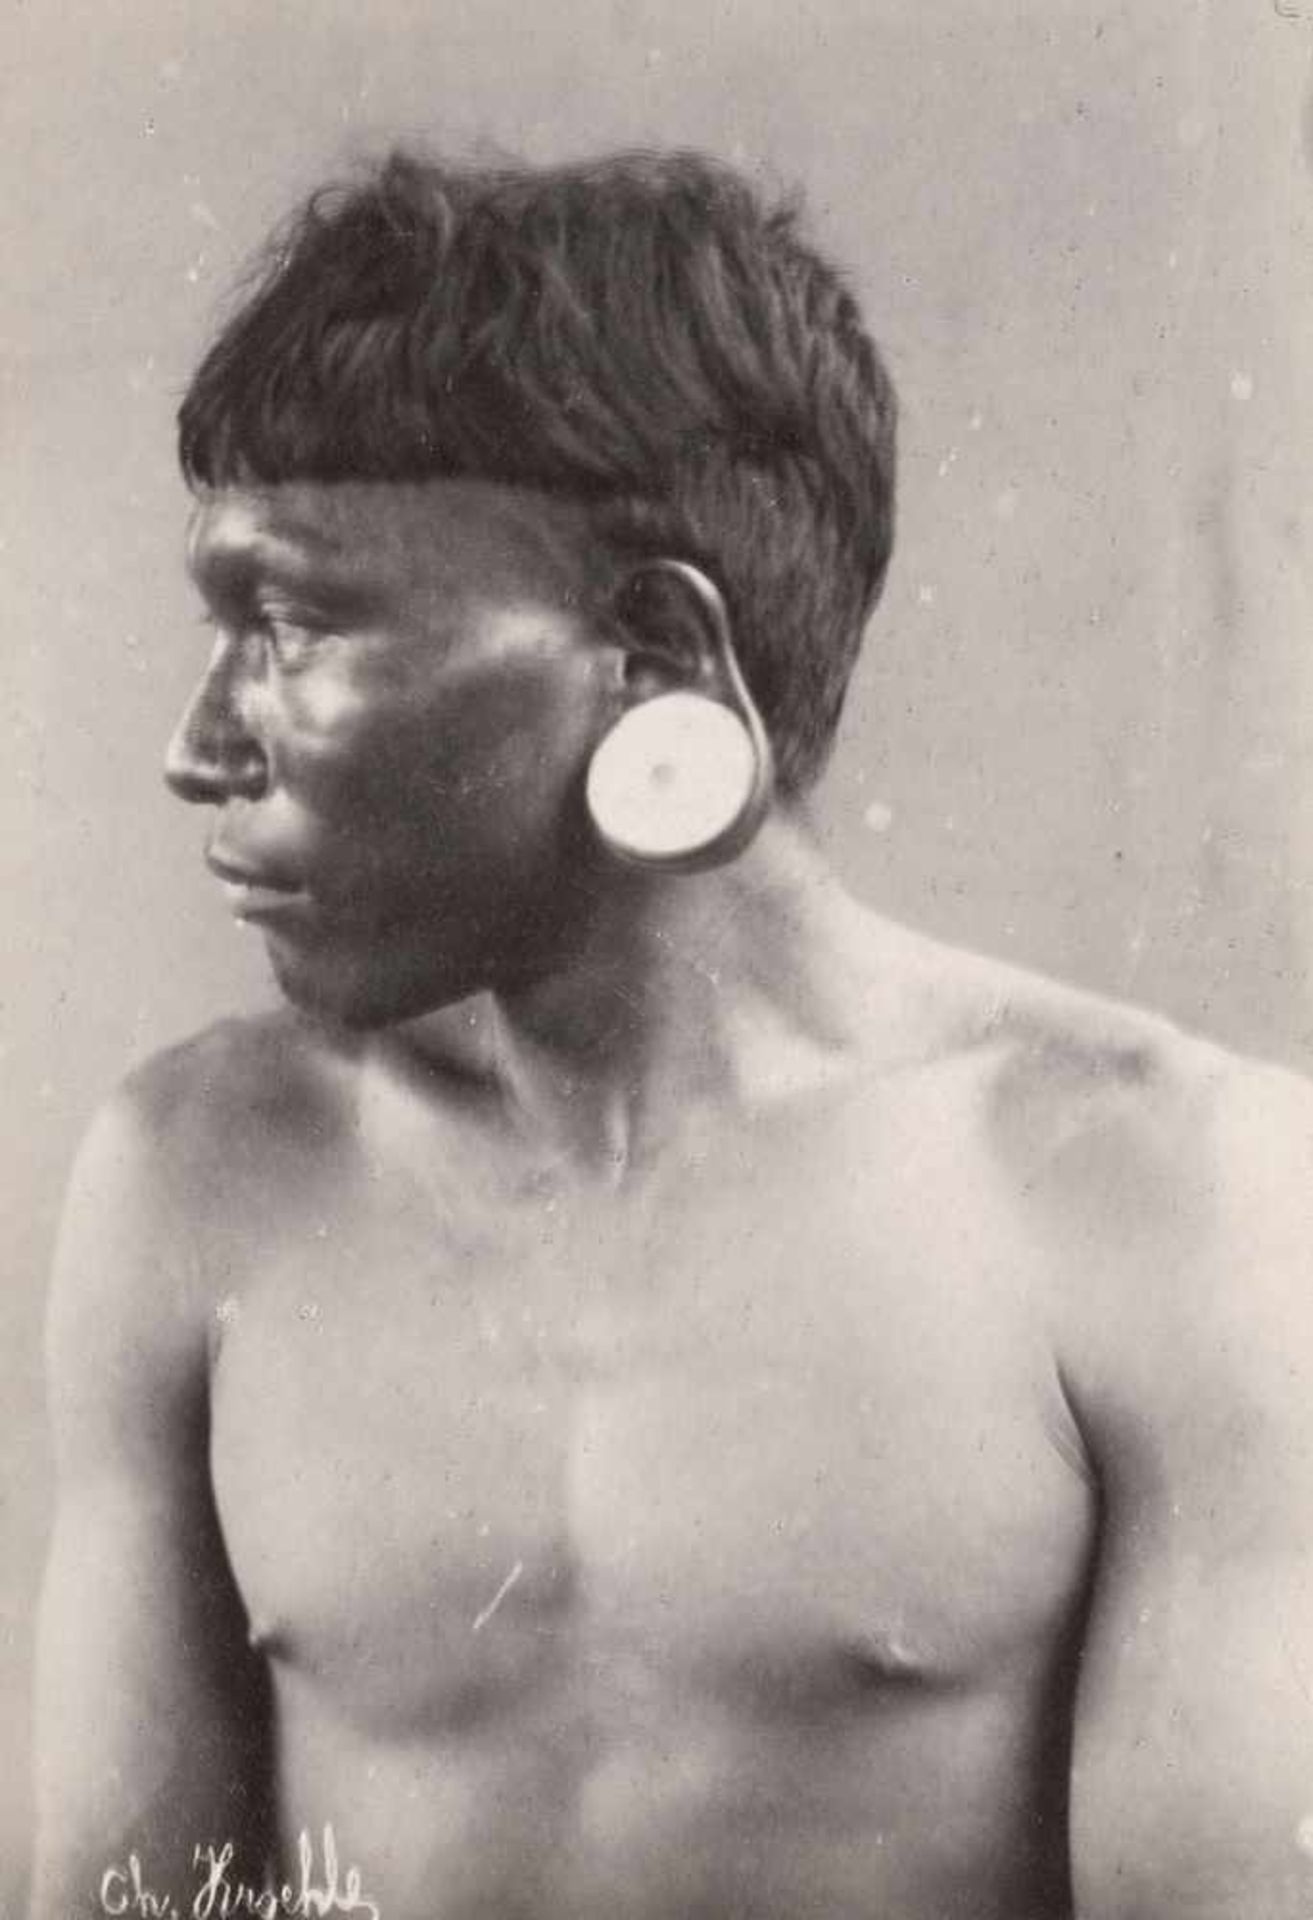 Amazonia / Koch-Grünberg Expedition: Portraits and ethnographical studies of Peru, Brazil and - Image 5 of 9